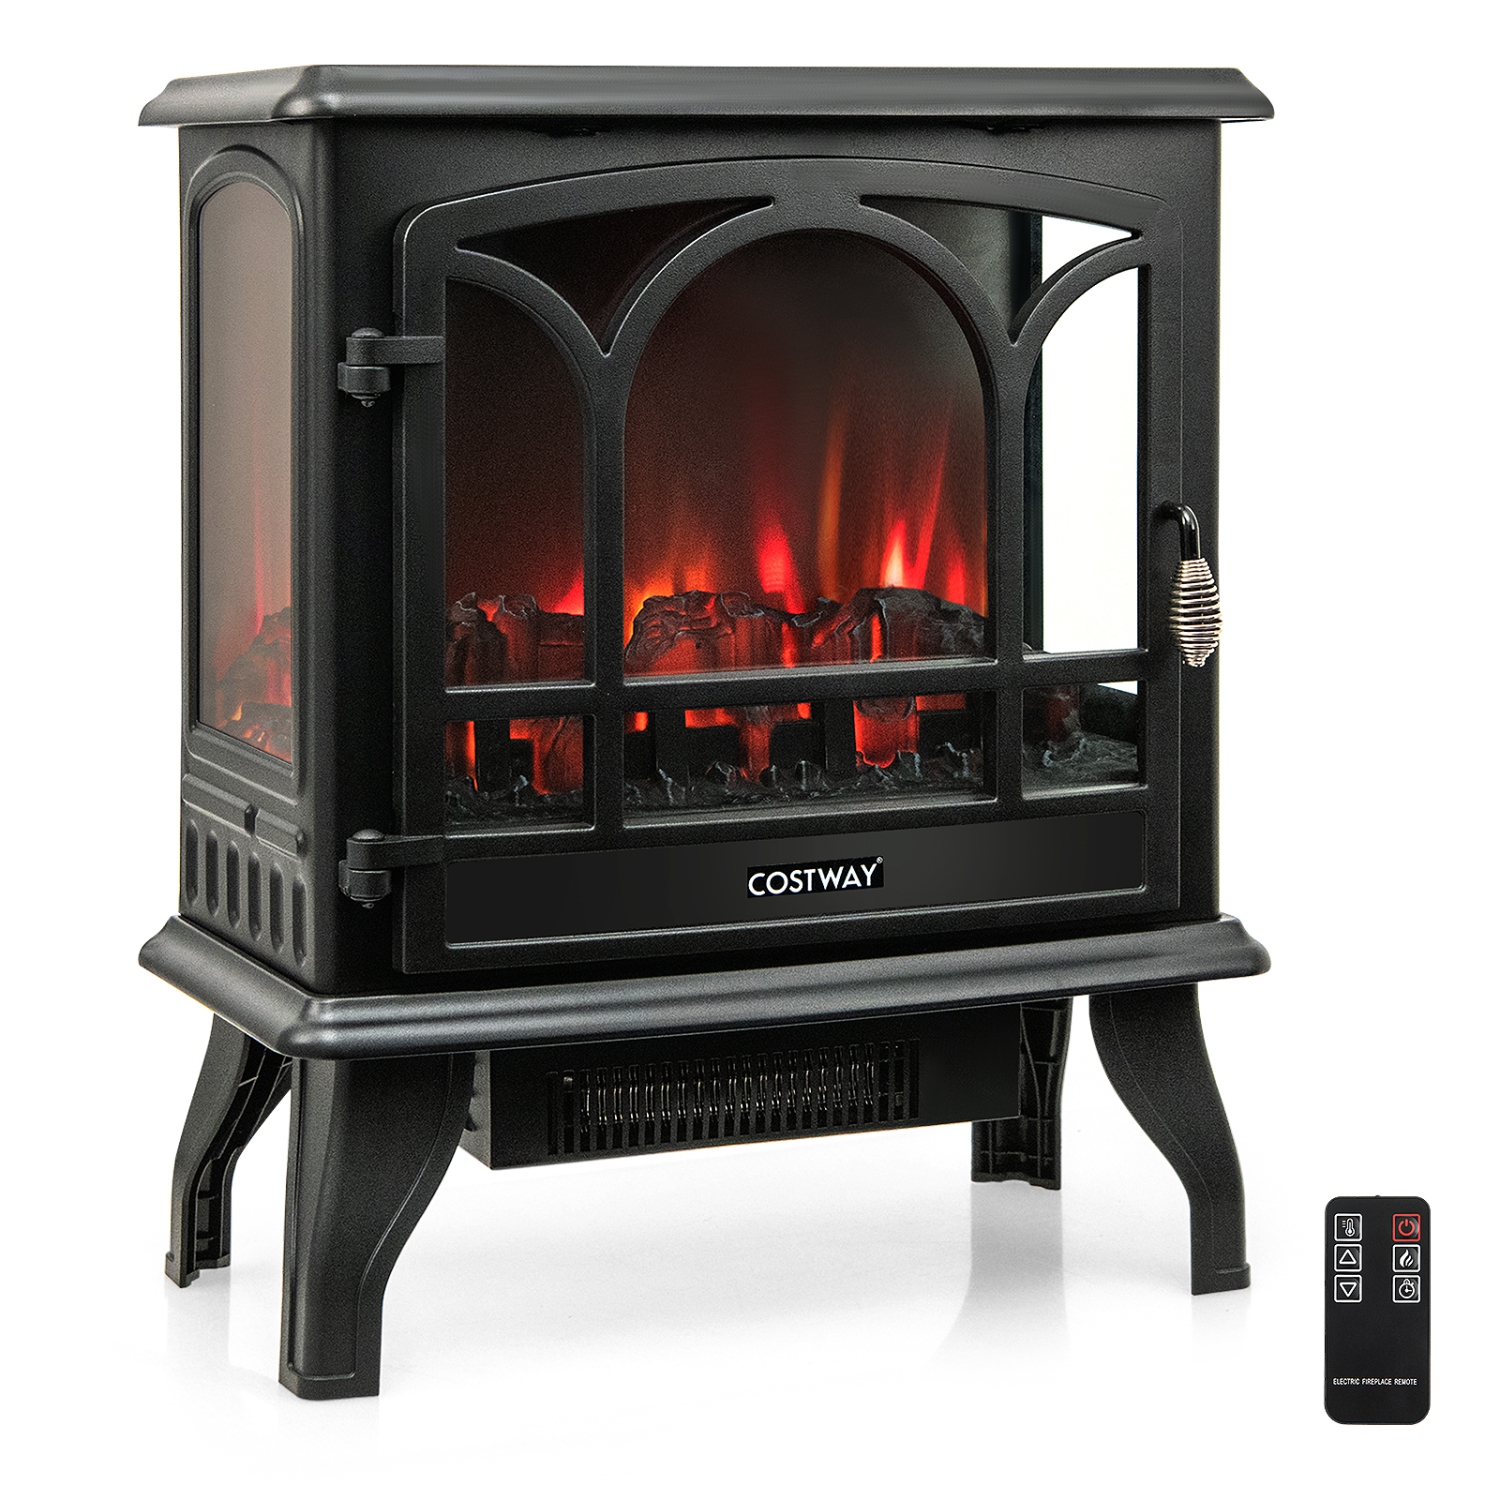 Costway 23" Freestanding Electric Fireplace Heater Stove W/ Realistic Flame Effect 1400W